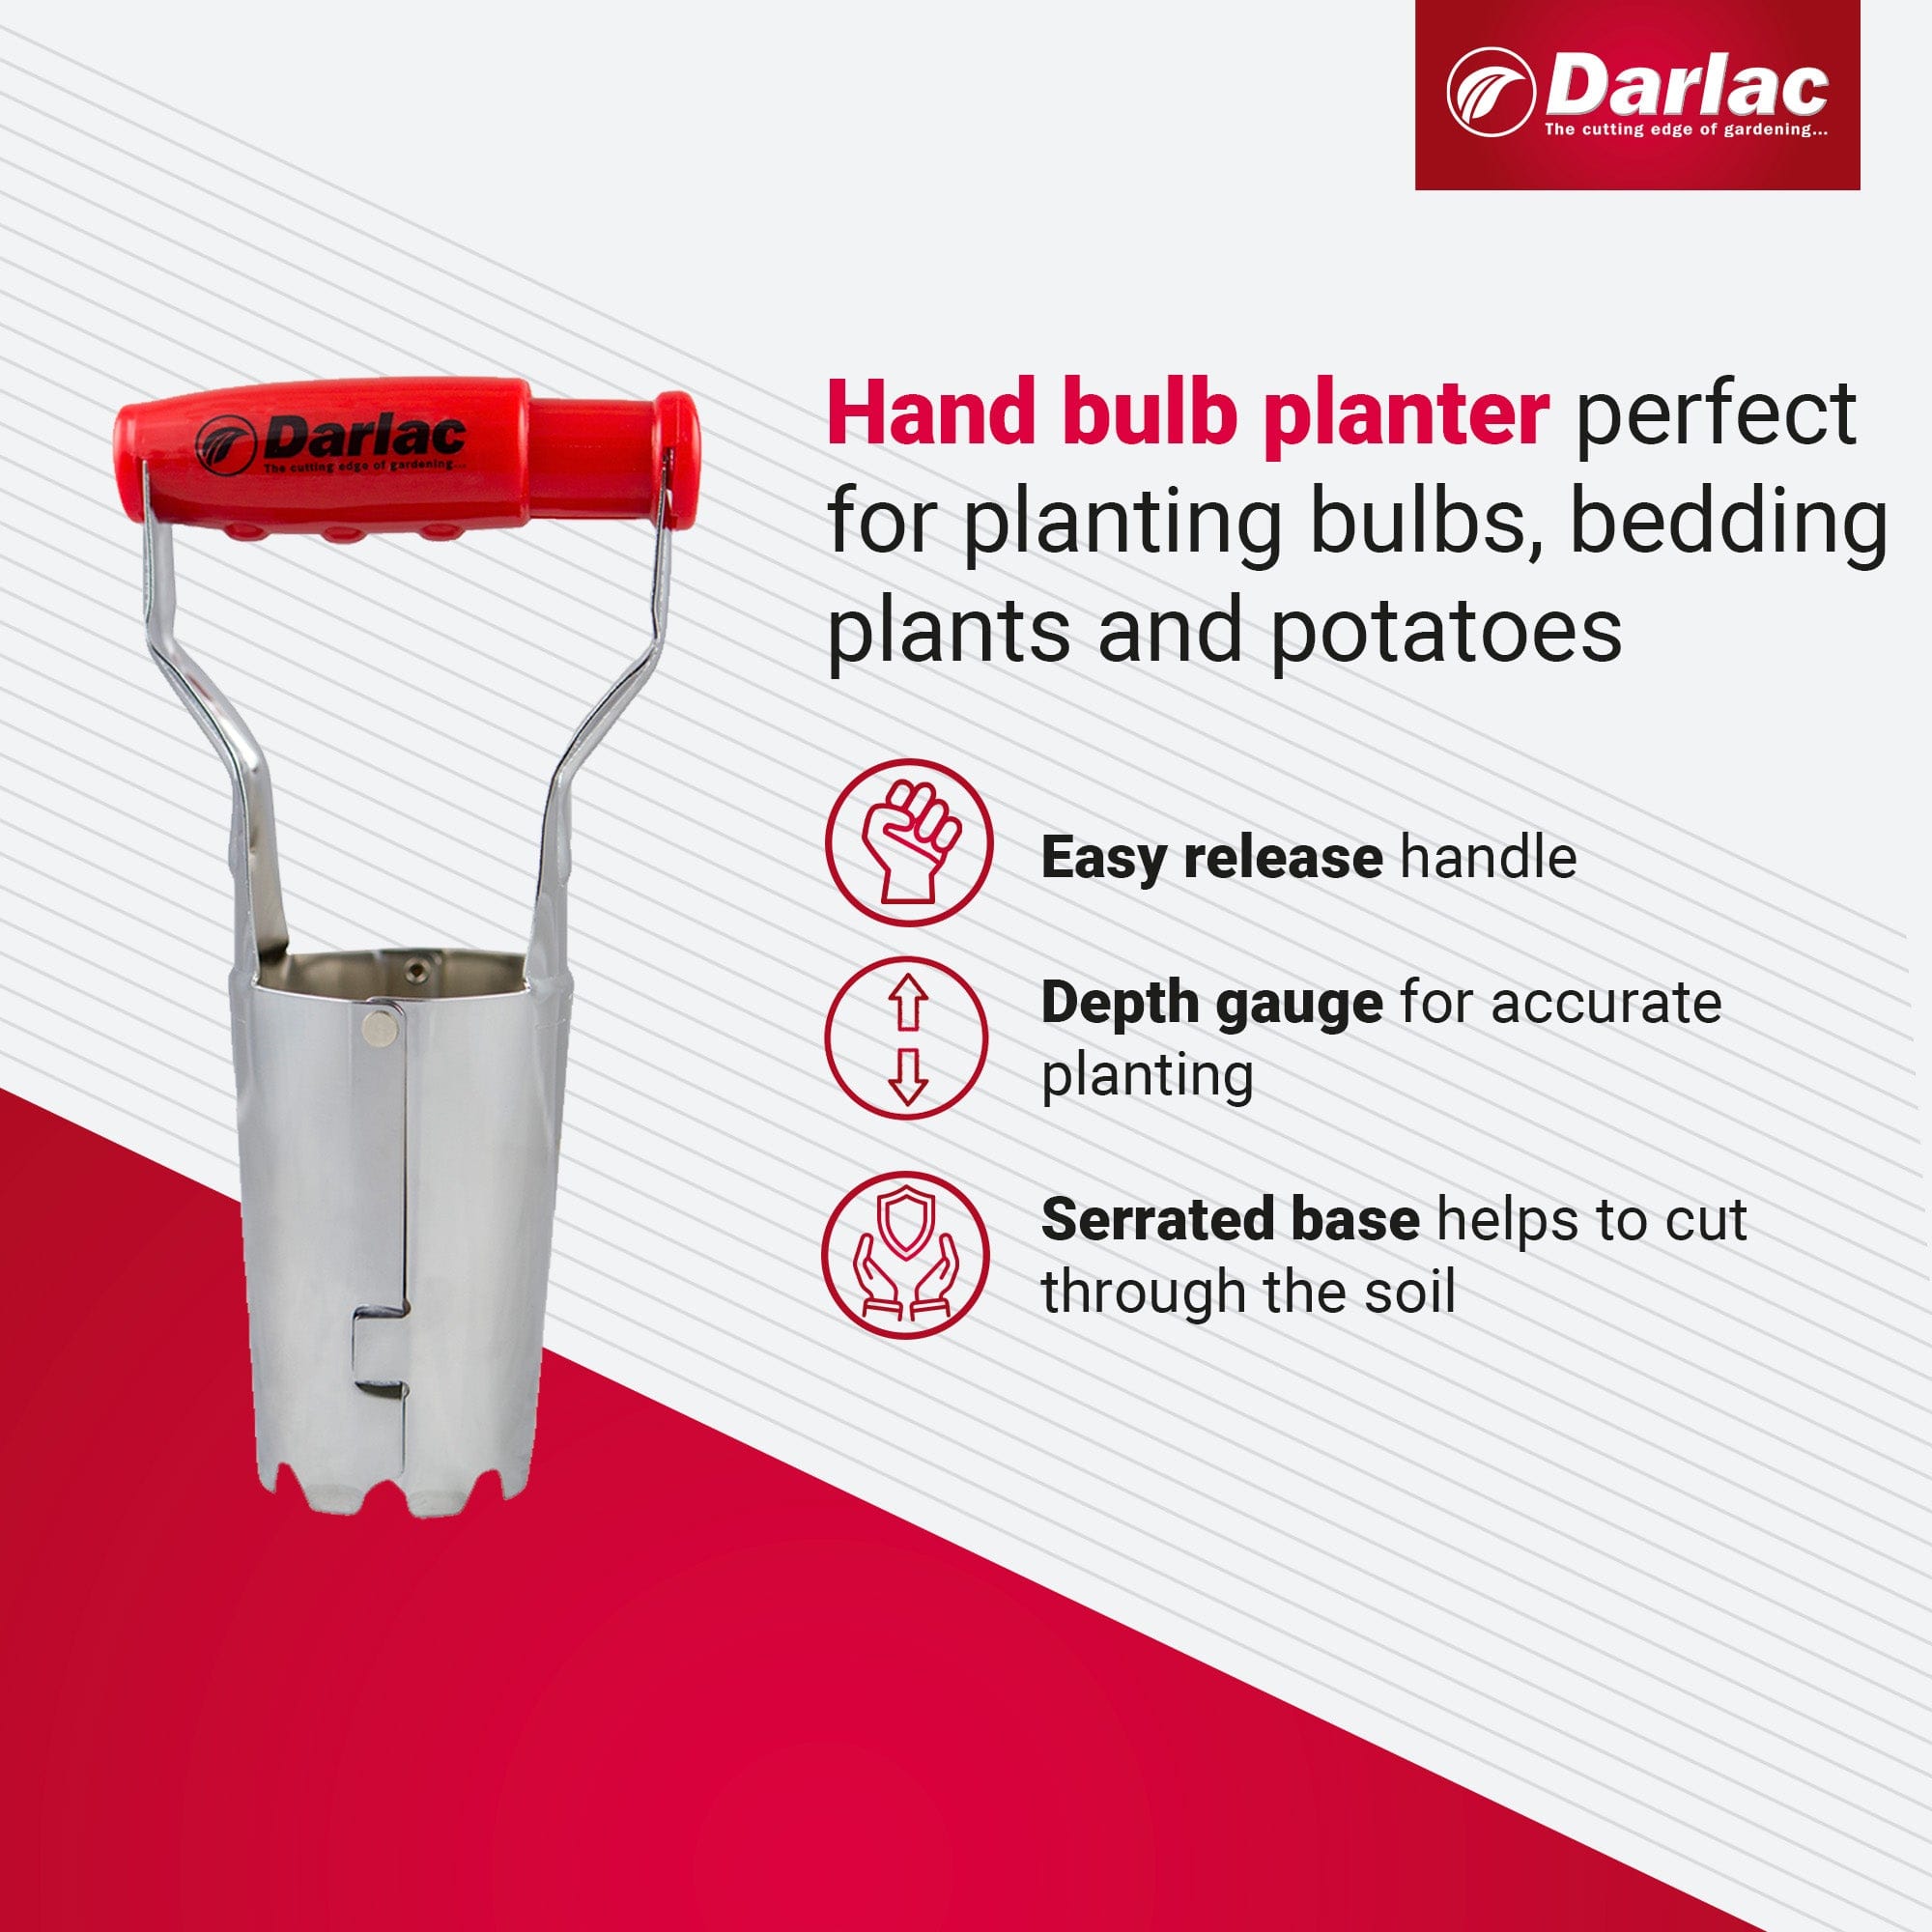 dt-brown HARDWARE Darlac Hand Bulb Planter